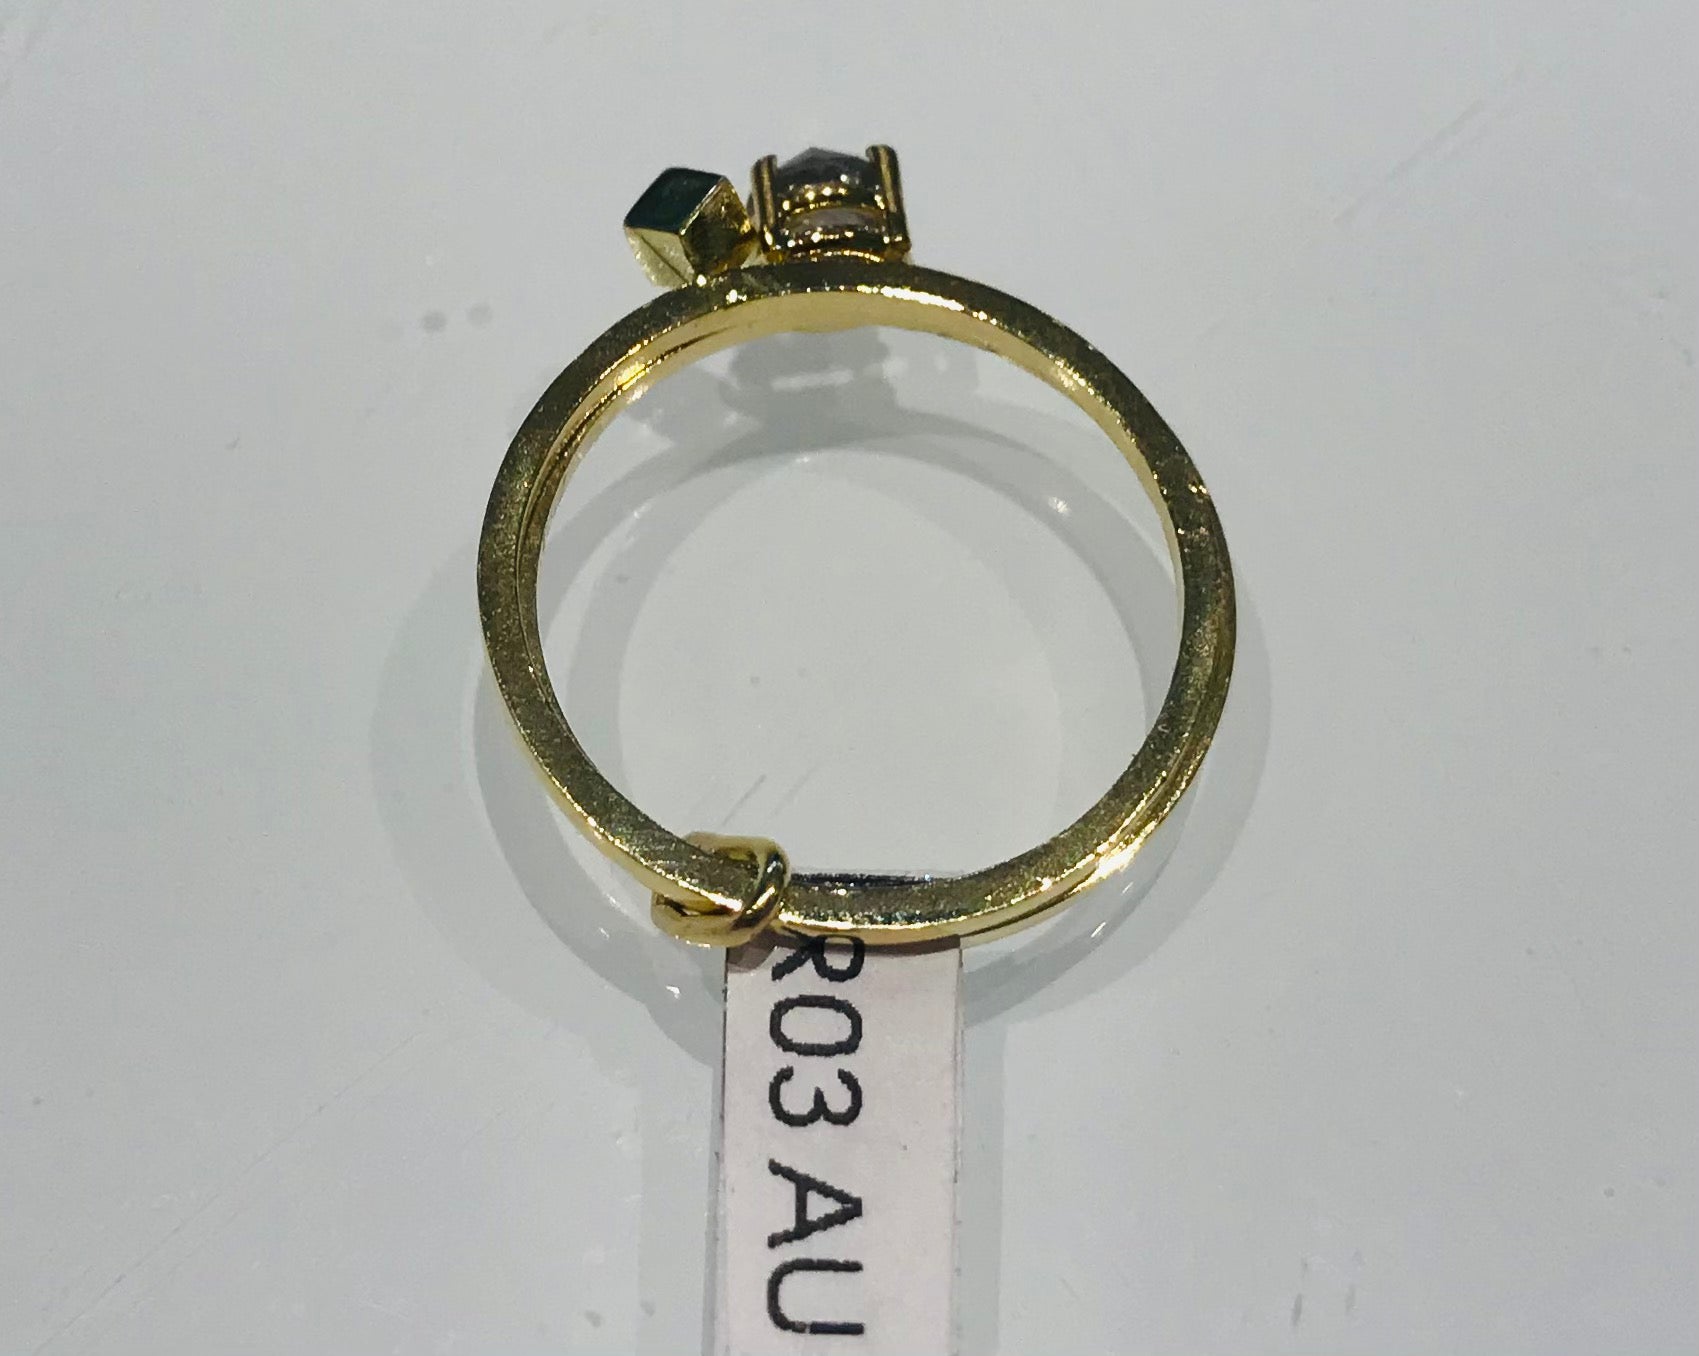 Lore Van Keer UNR R03 golden ring with diamond and cube